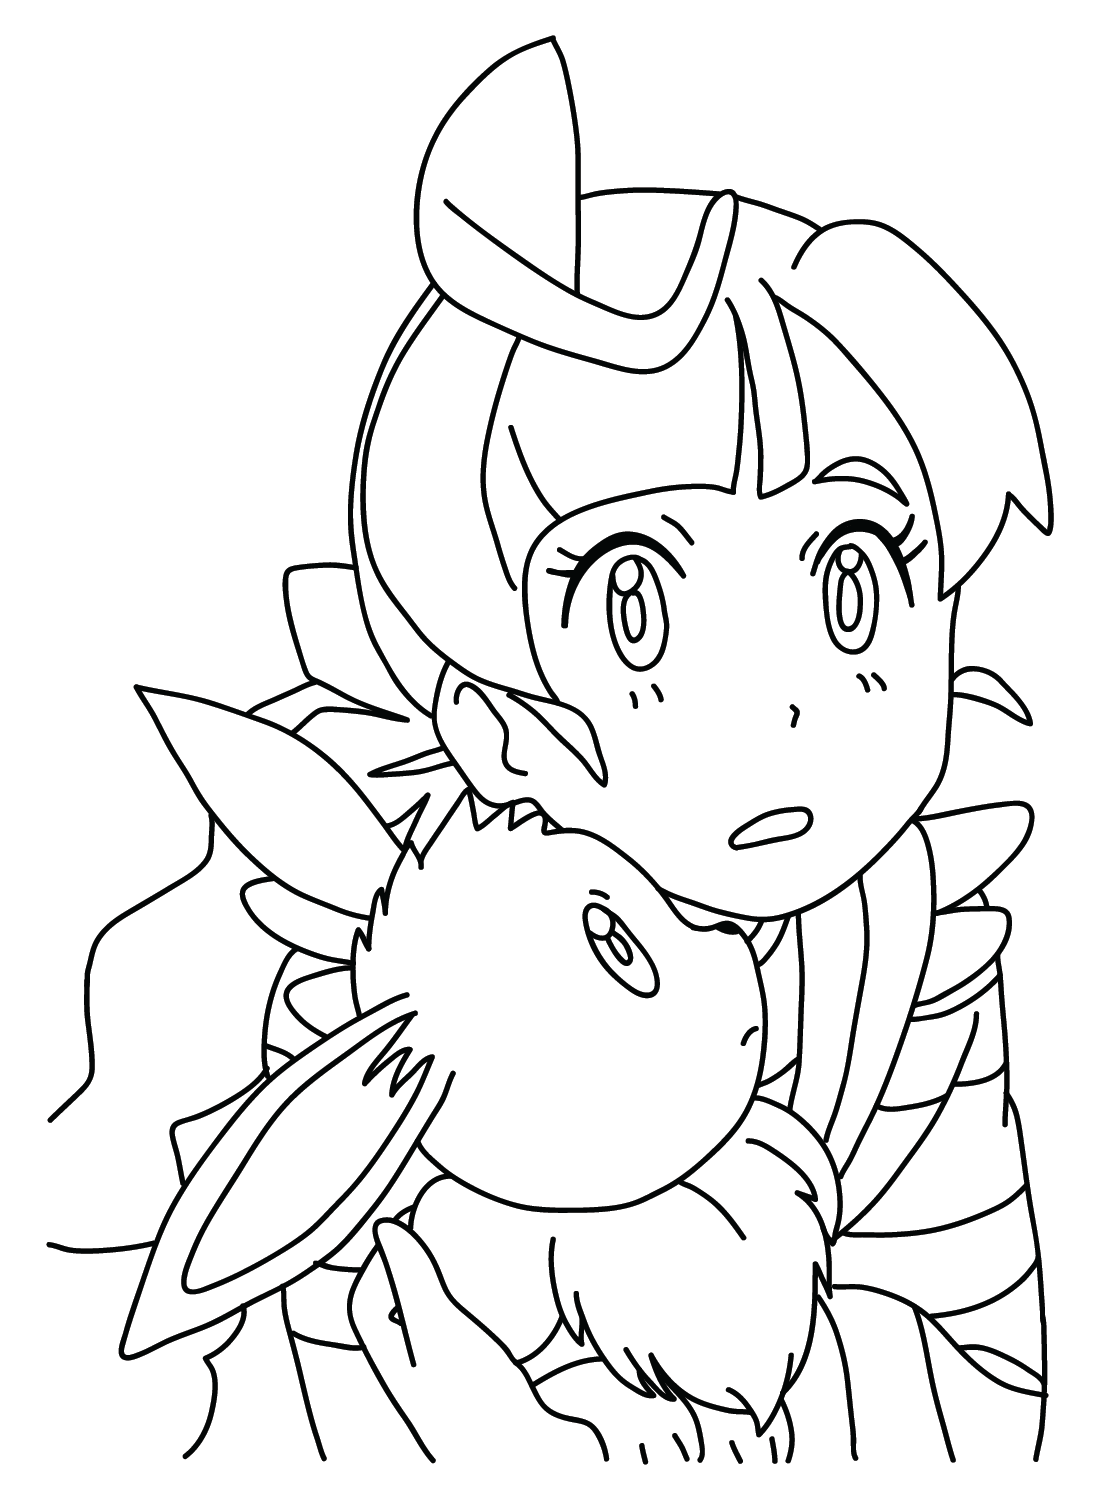 200 Eevee Coloring Pages: Evolve Your Art Skills 186